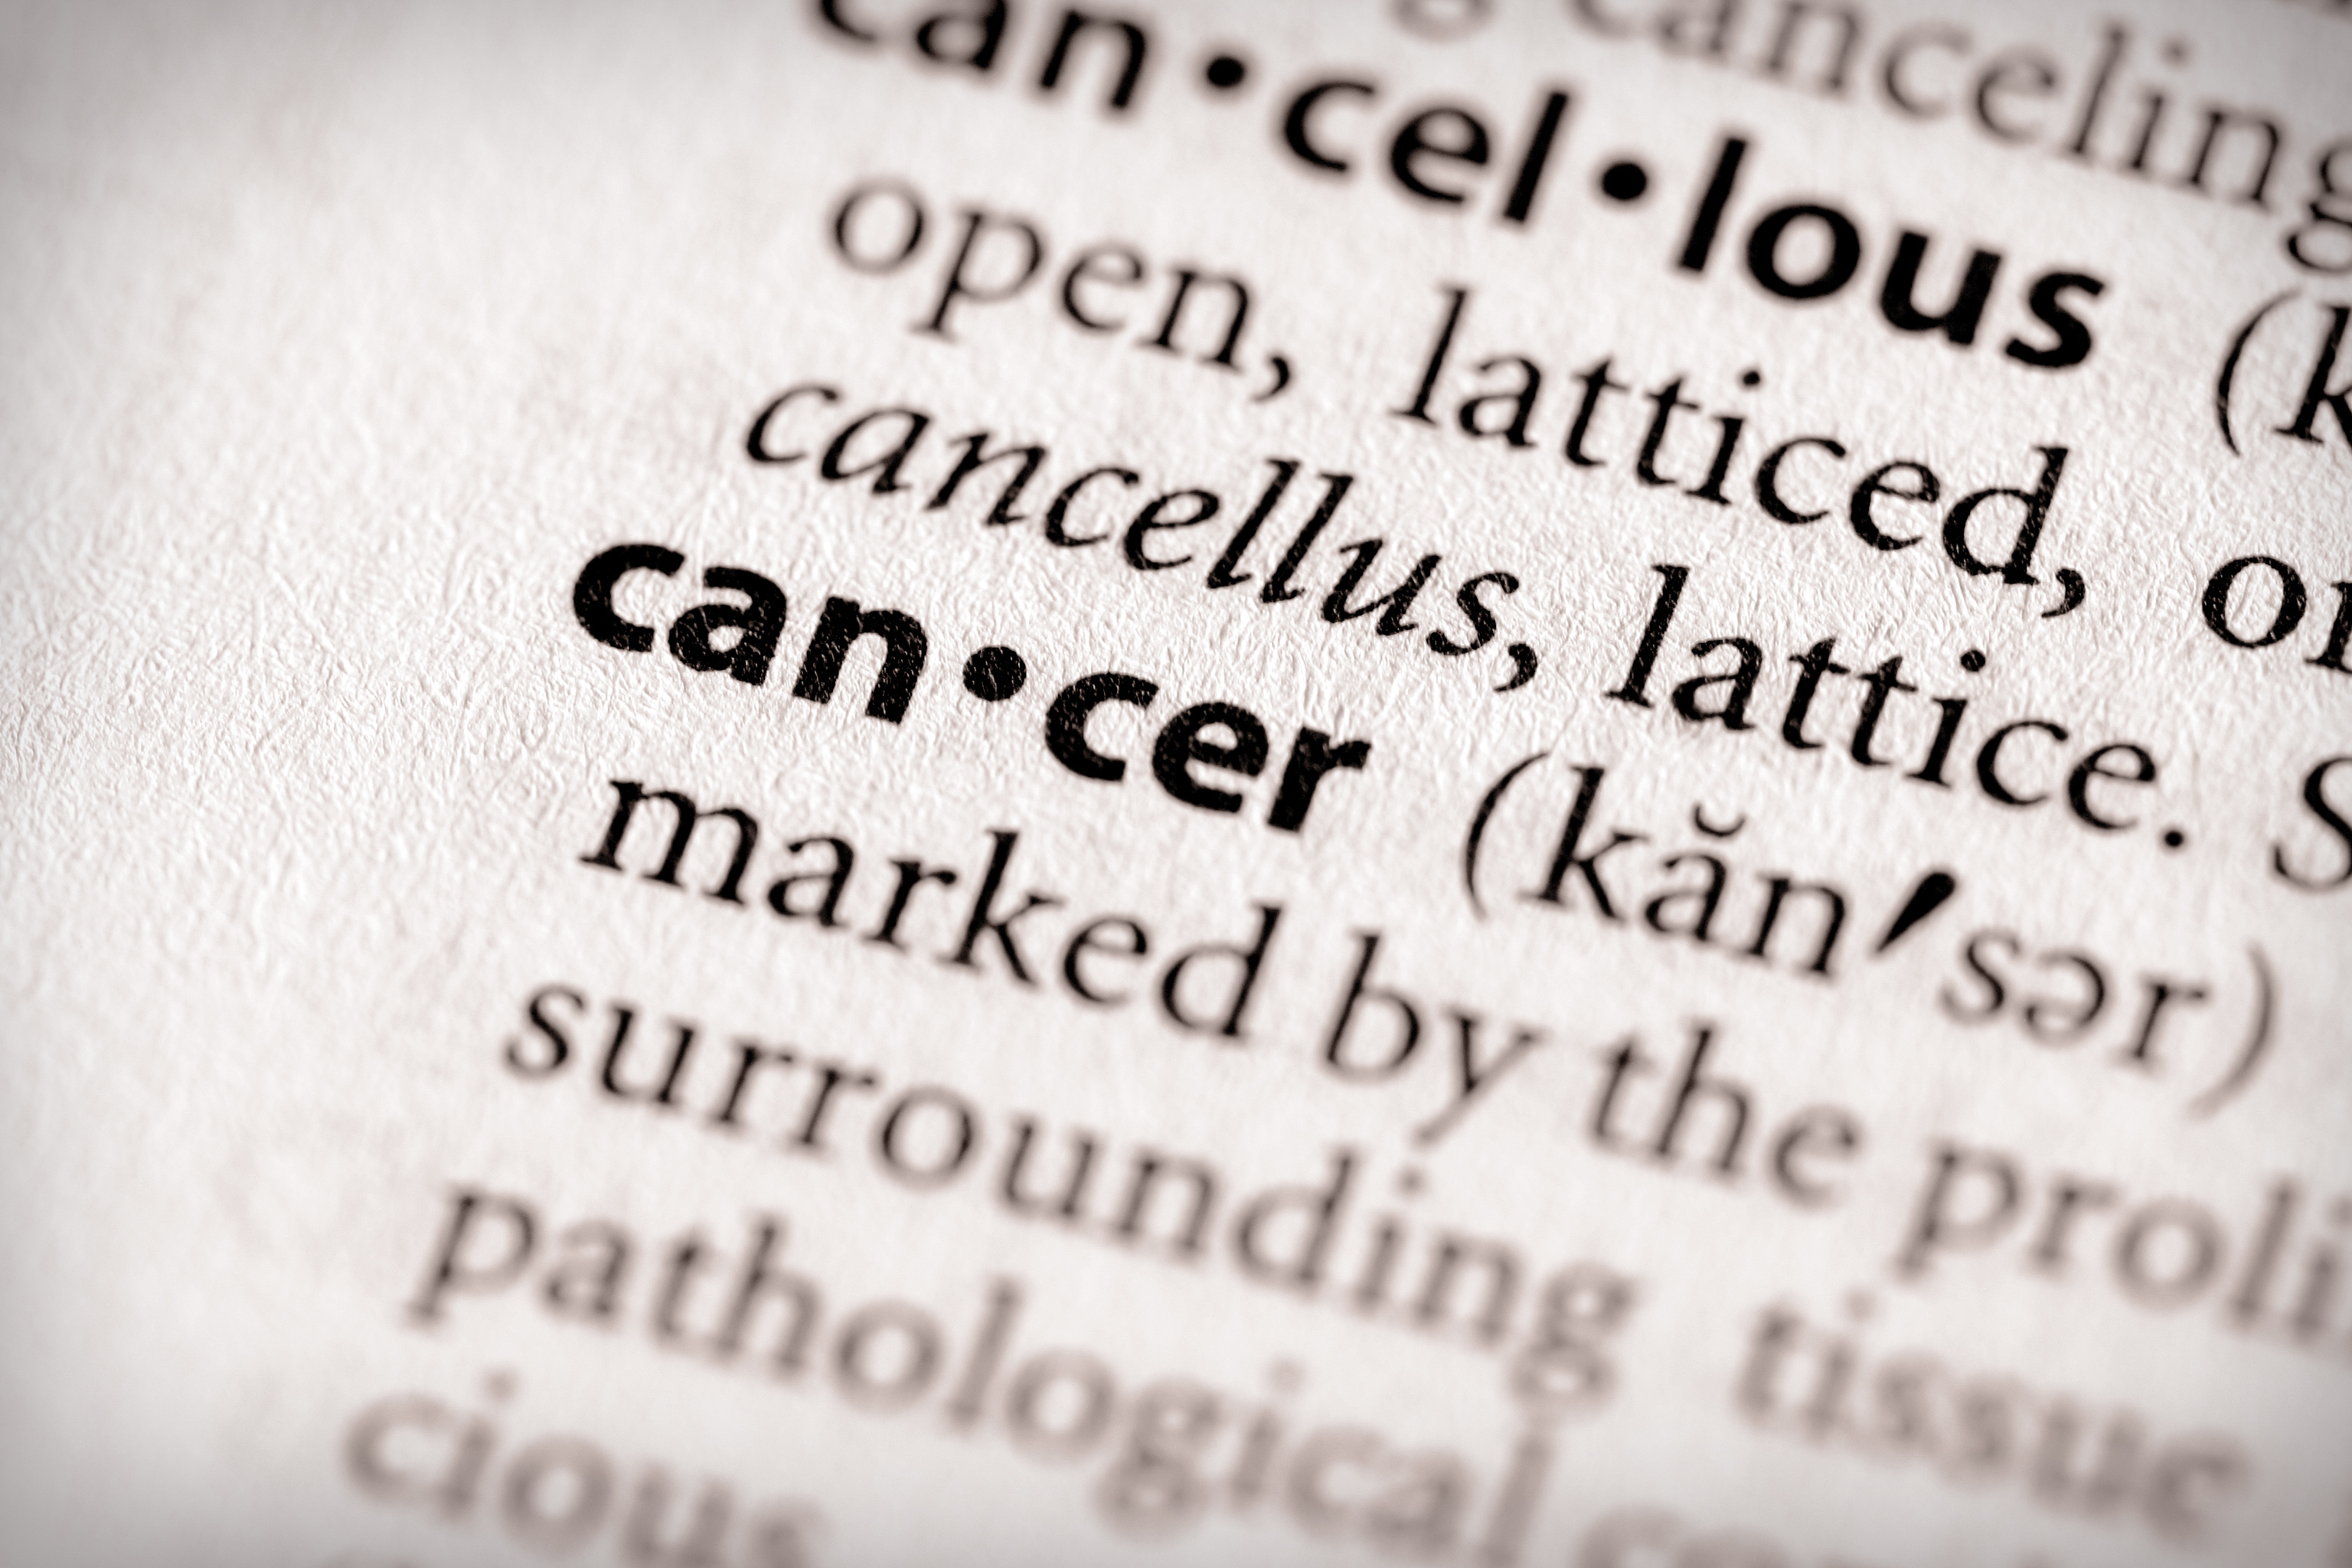 Selective focus on the word "cancer". Many more word photos in my portfolio...